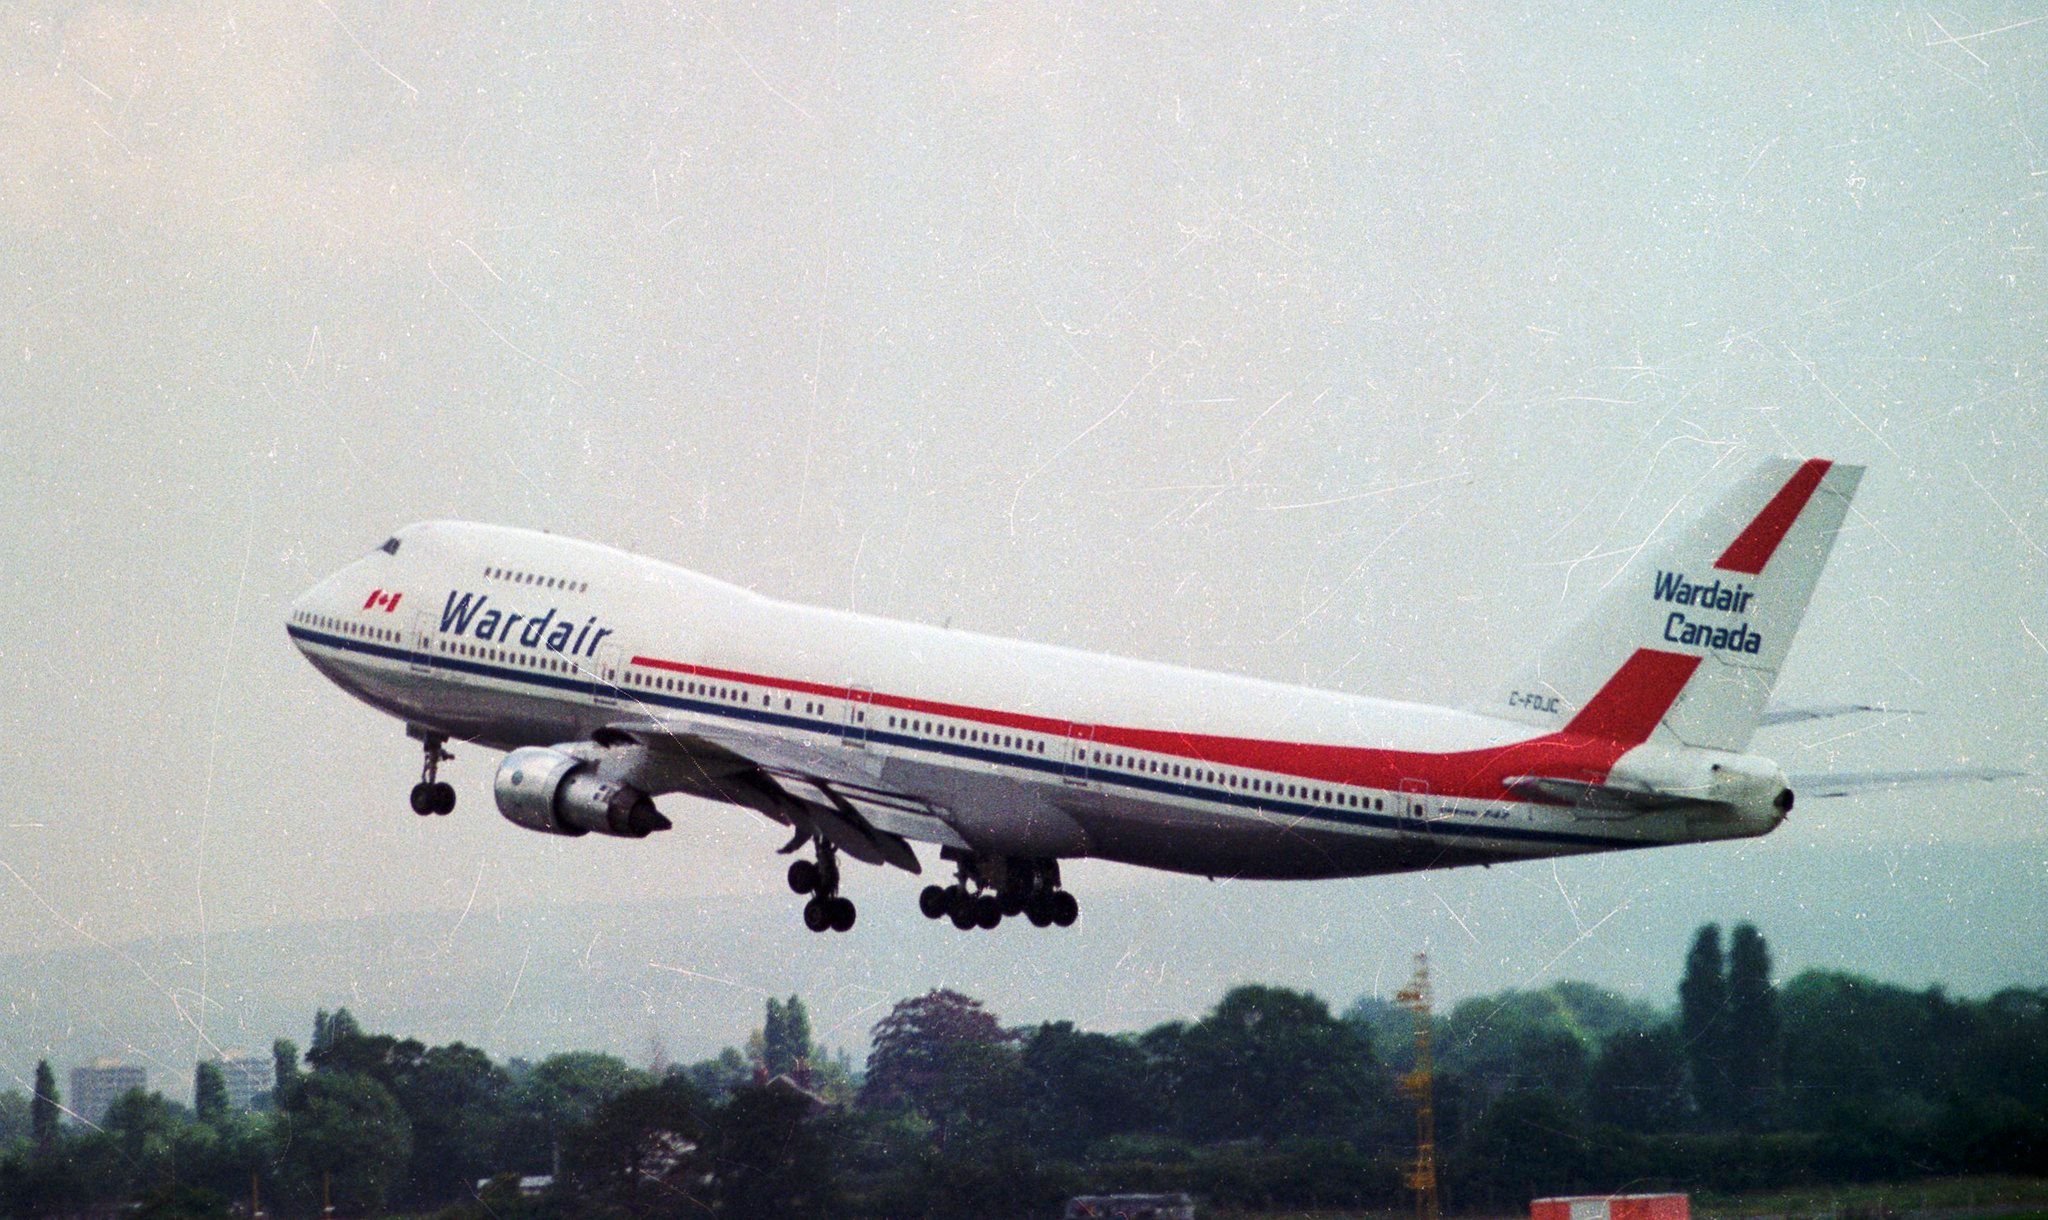 A Wardair Boeing 747-100 just after taking off.